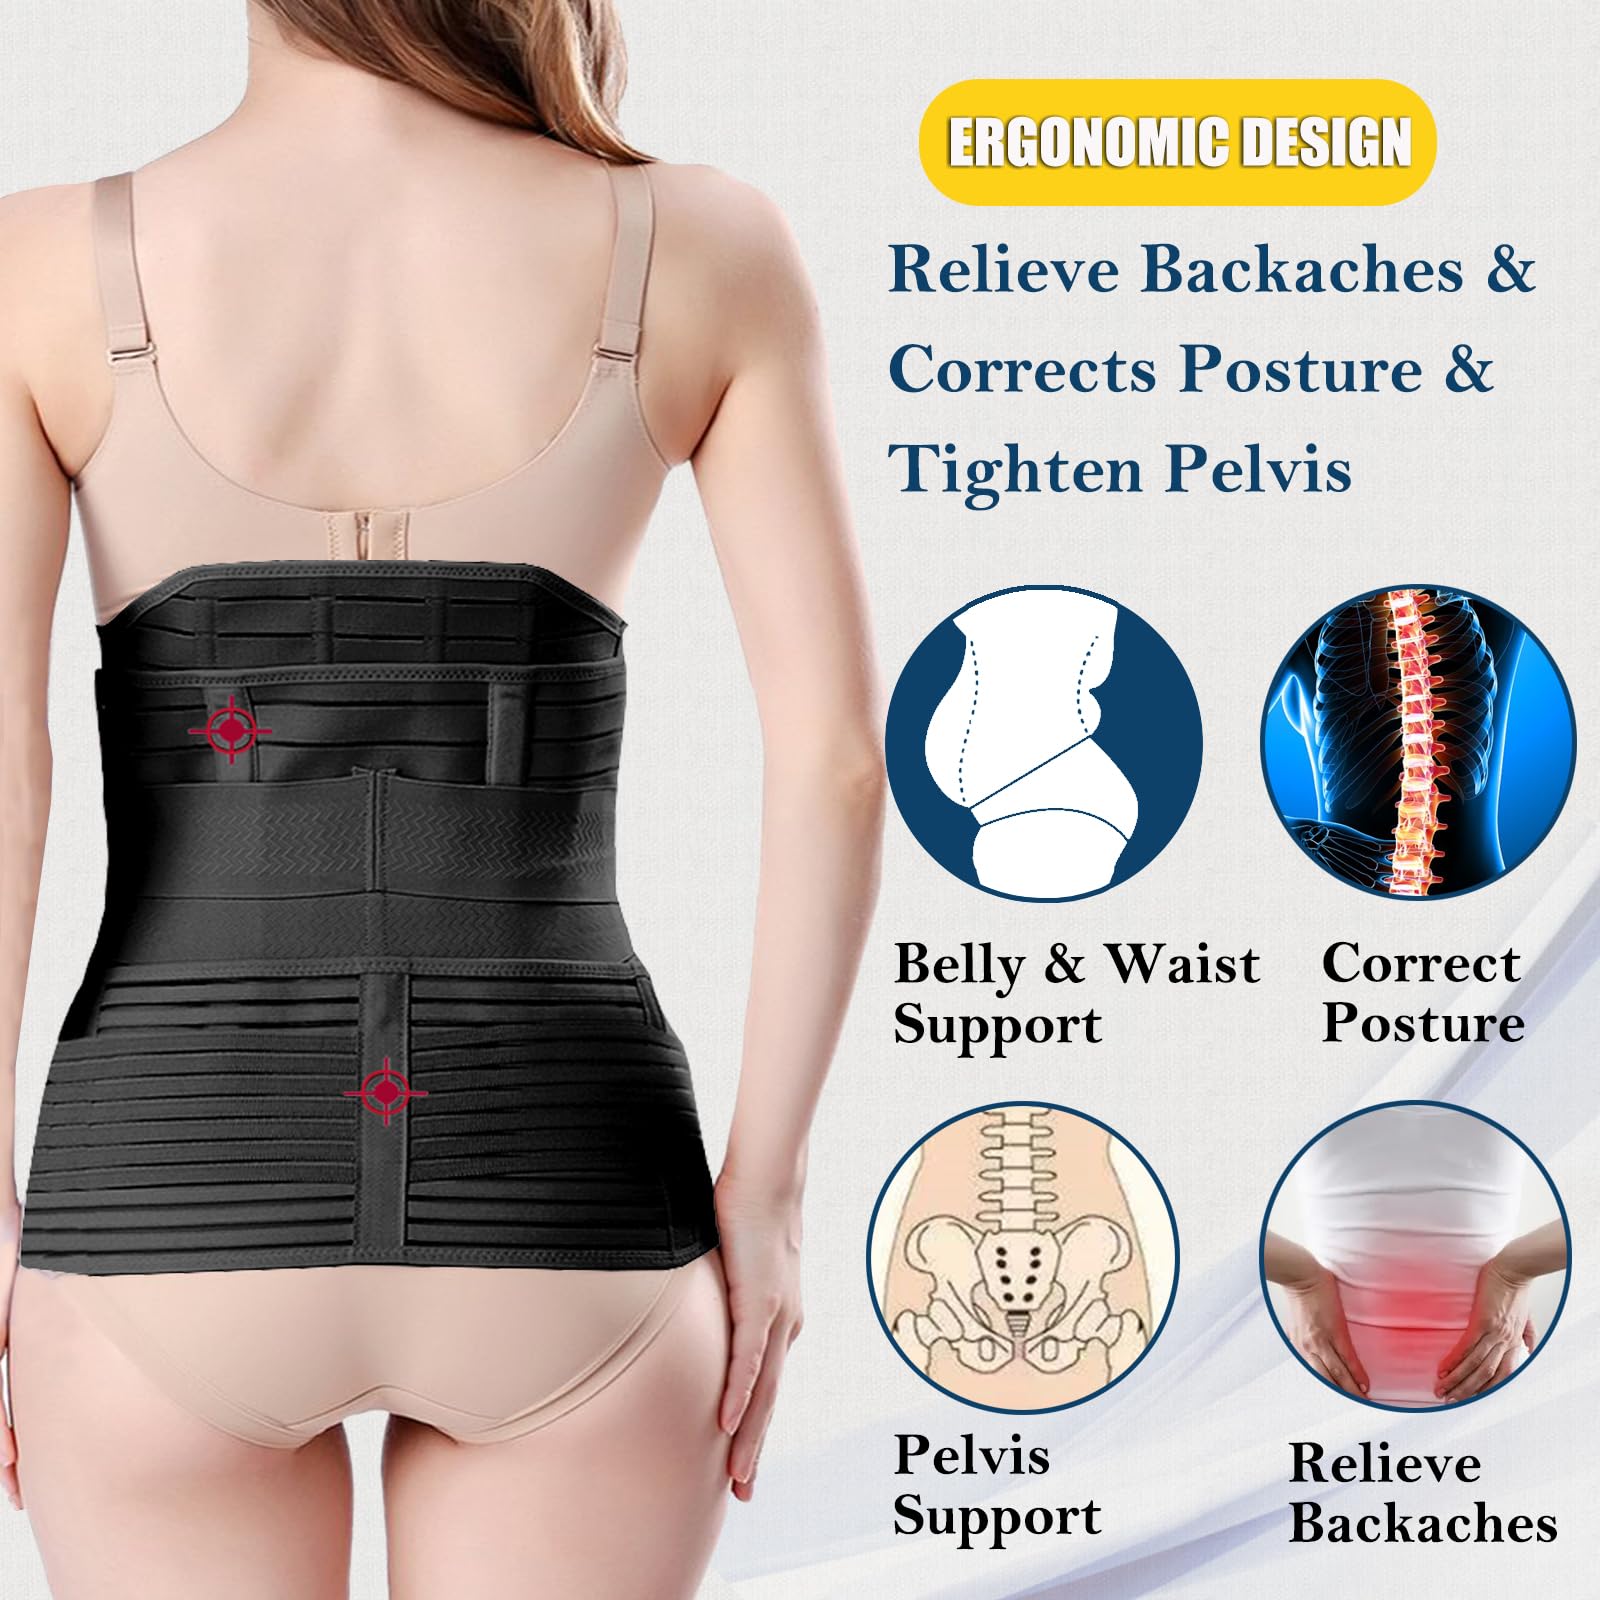 3 in 1 Postpartum Belly Band - Postpartum Belly Support Recovery Wrap, After Birth Brace, Slimming Girdles, Body Shaper Waist Shapewear, Post Surgery Pregnancy Belly Support Band (S/M, Black)